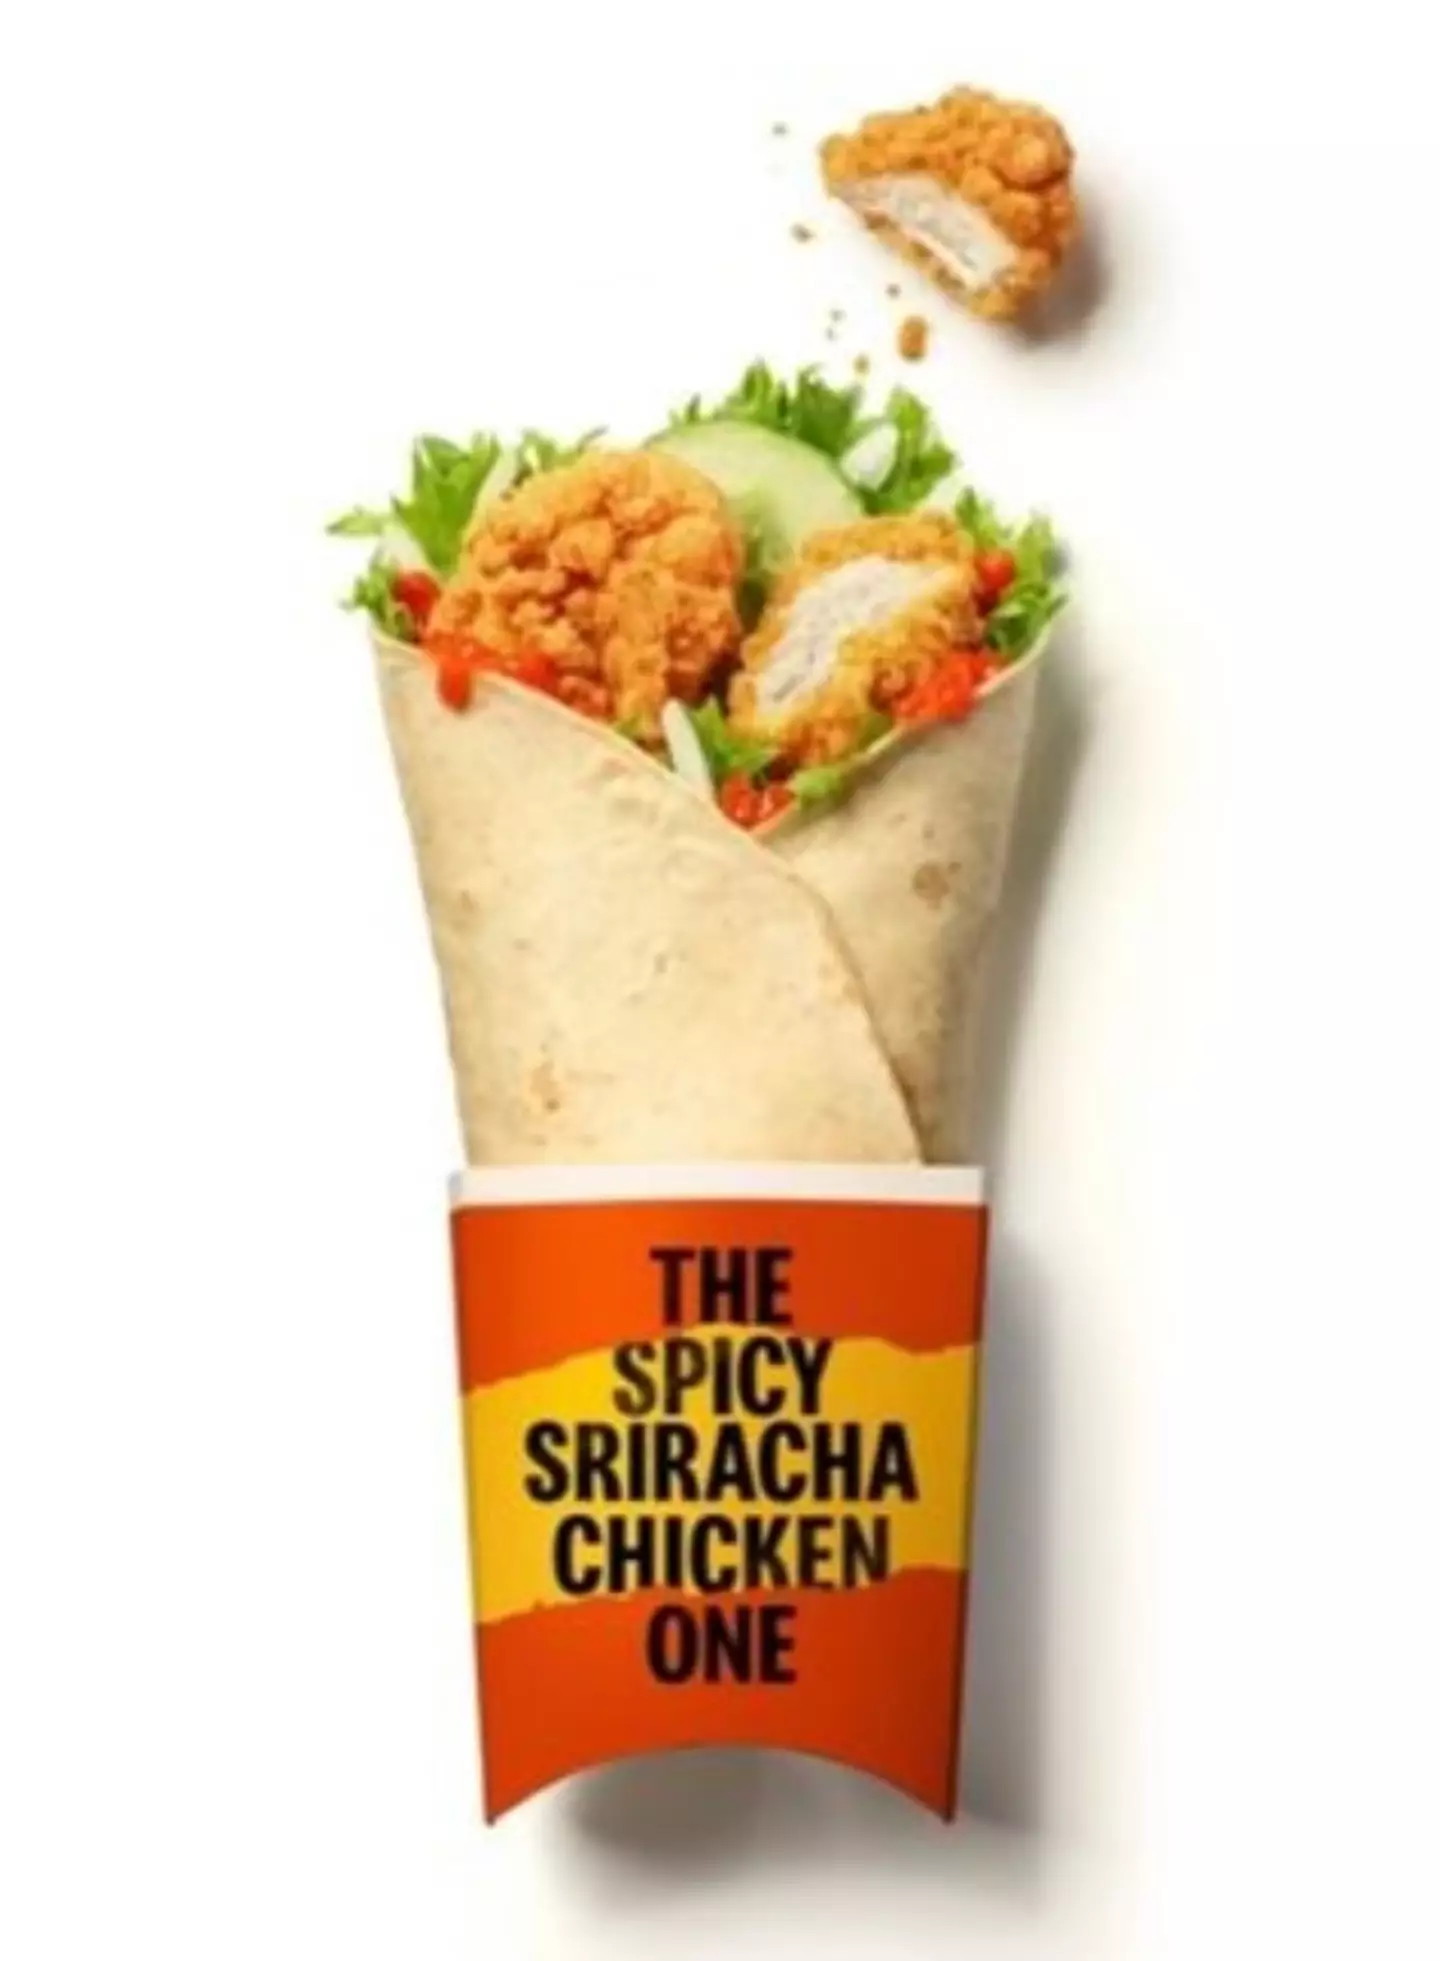 McDonald's are bringing out a new spicy chicken wrap.